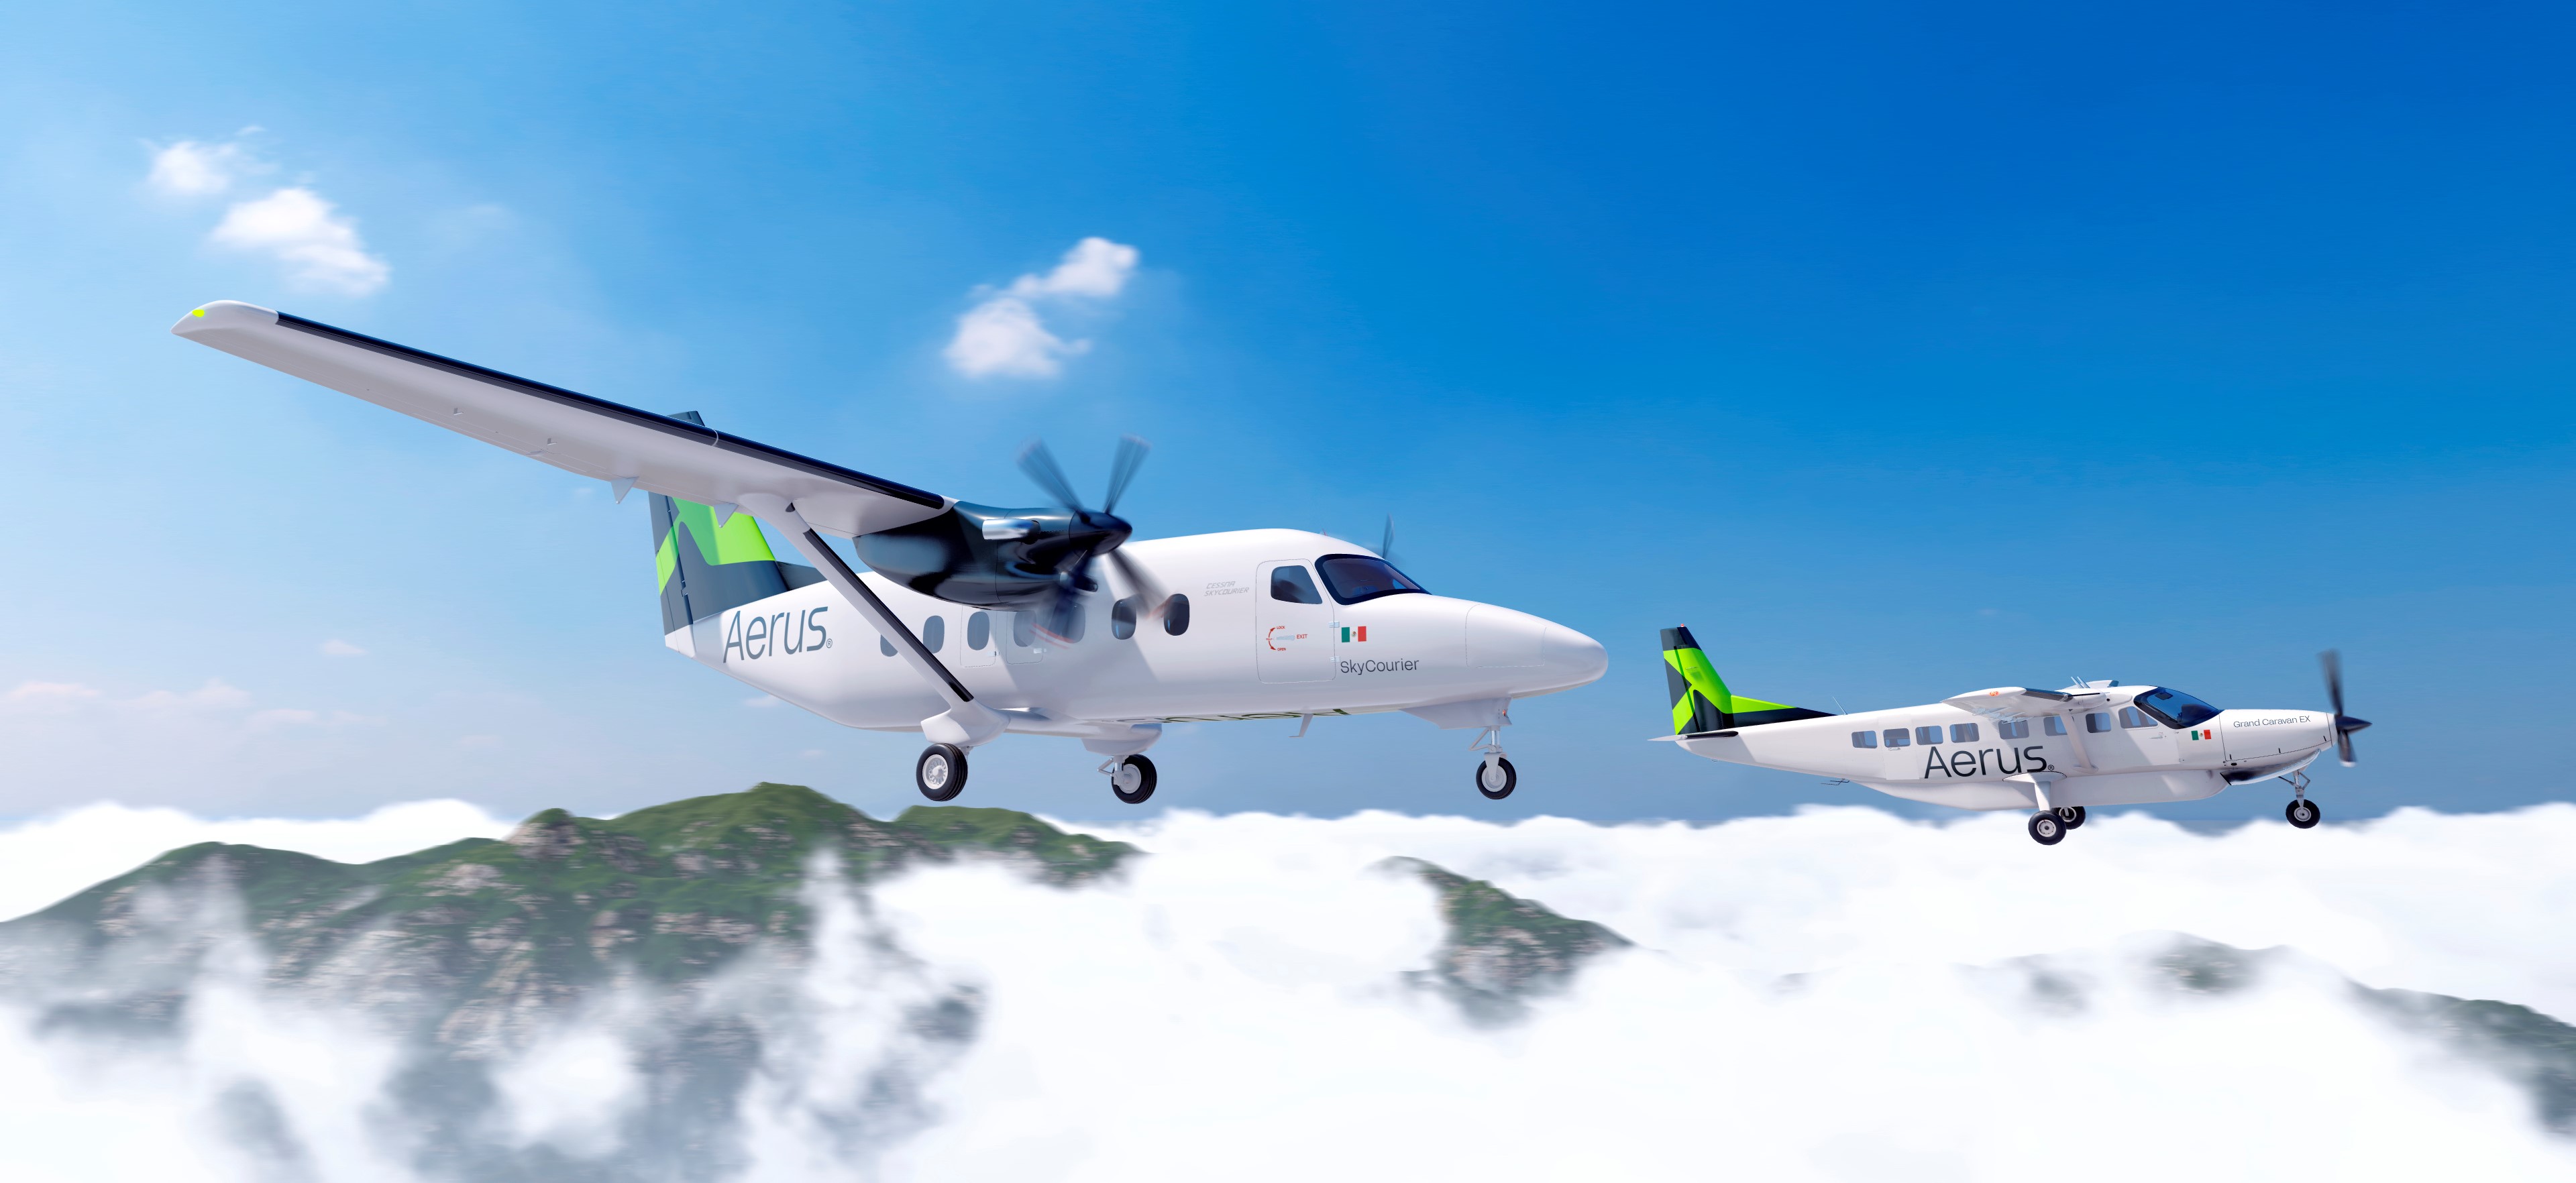 New  Mexican  Regional  Airline  Aerus  To  Launch  Its  Flights  Using  Two  19  Seater  Cessna  SkyCourier  And  Four  Cessna  Grand  Caravan  EX  Turboprops .